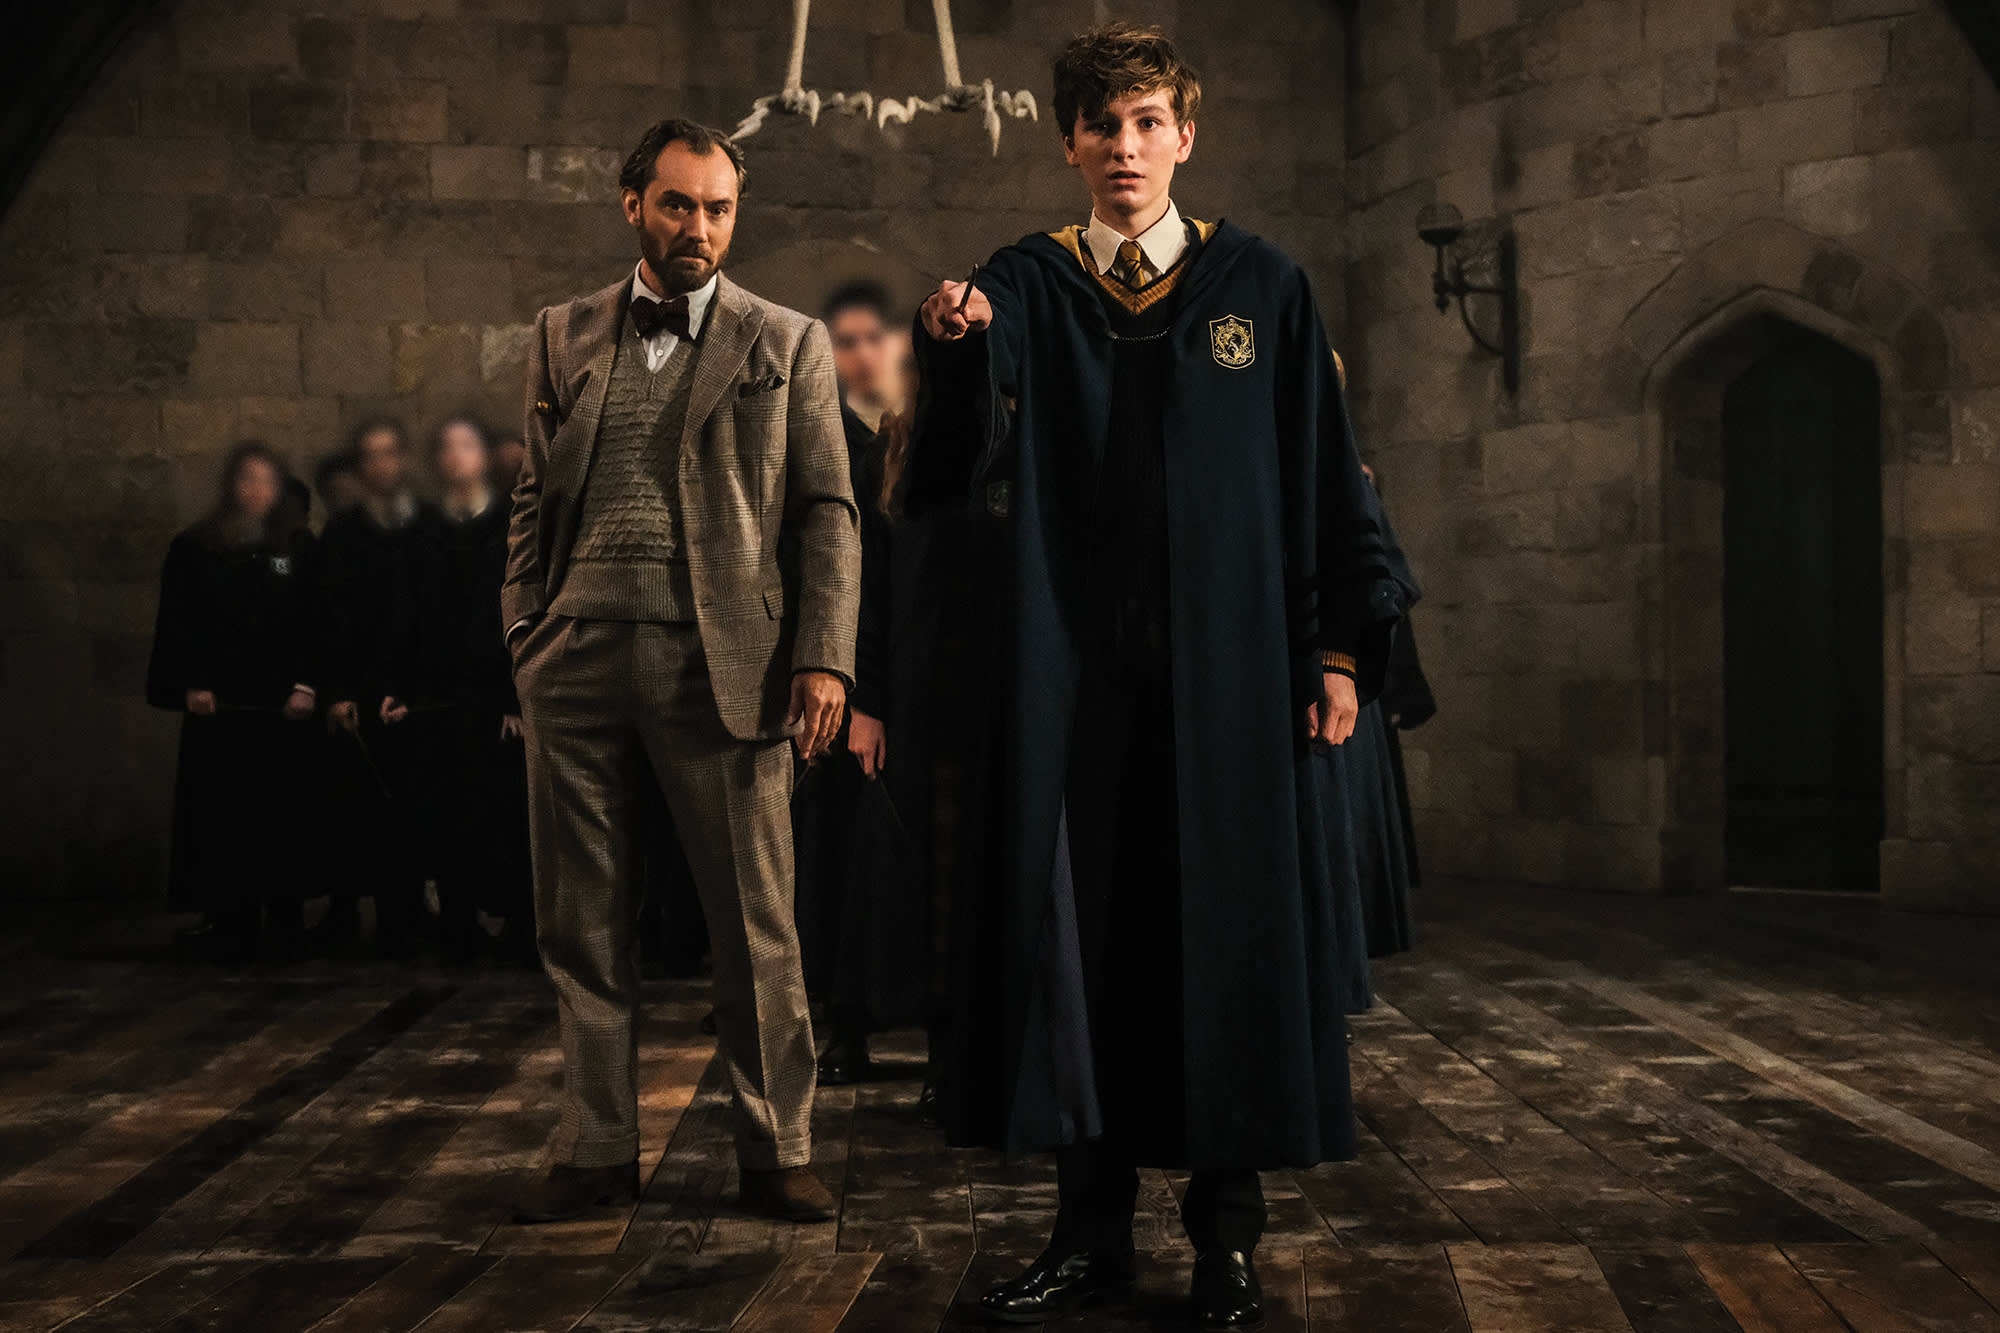 Albus Dumbledore and young Newt Scamander in a lesson. Newt has his wand raised as Dumbledore watches.